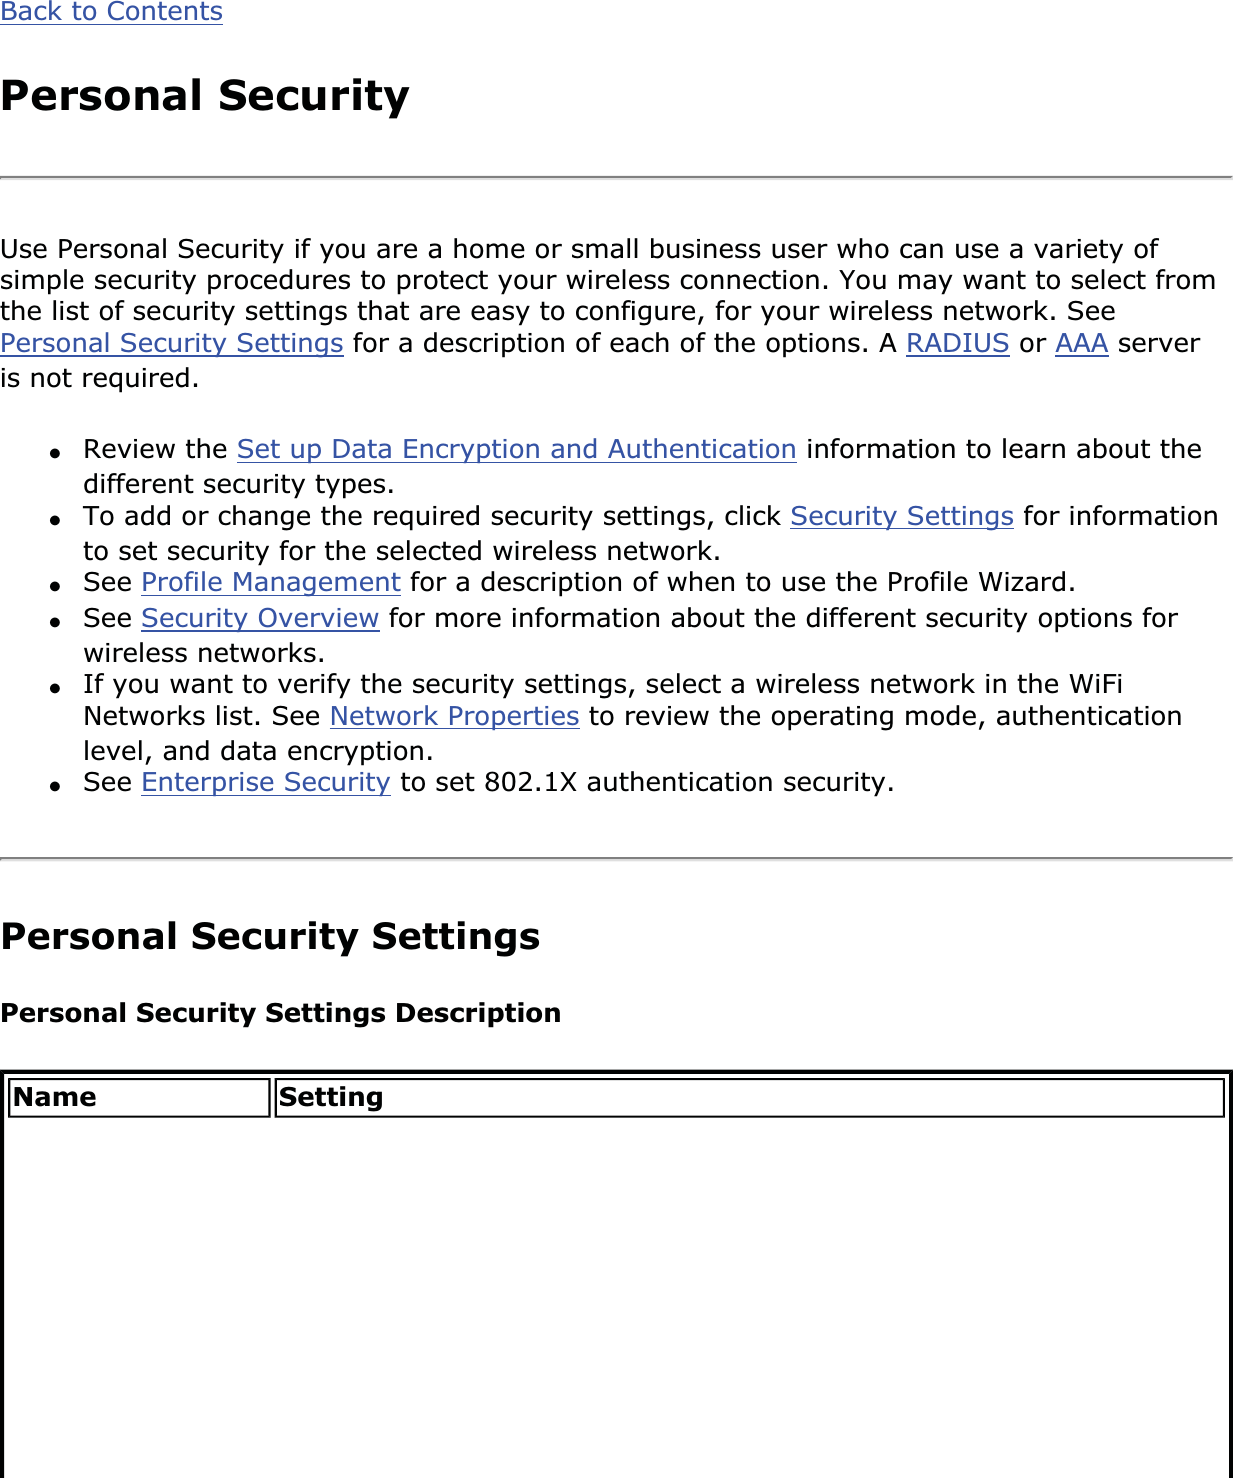 Back to ContentsPersonal SecurityUse Personal Security if you are a home or small business user who can use a variety of simple security procedures to protect your wireless connection. You may want to select from the list of security settings that are easy to configure, for your wireless network. See Personal Security Settings for a description of each of the options. A RADIUS or AAA server is not required. ●Review the Set up Data Encryption and Authentication information to learn about the different security types. ●To add or change the required security settings, click Security Settings for information to set security for the selected wireless network.●See Profile Management for a description of when to use the Profile Wizard. ●See Security Overview for more information about the different security options for wireless networks. ●If you want to verify the security settings, select a wireless network in the WiFi Networks list. See Network Properties to review the operating mode, authentication level, and data encryption. ●See Enterprise Security to set 802.1X authentication security.Personal Security SettingsPersonal Security Settings DescriptionName Setting